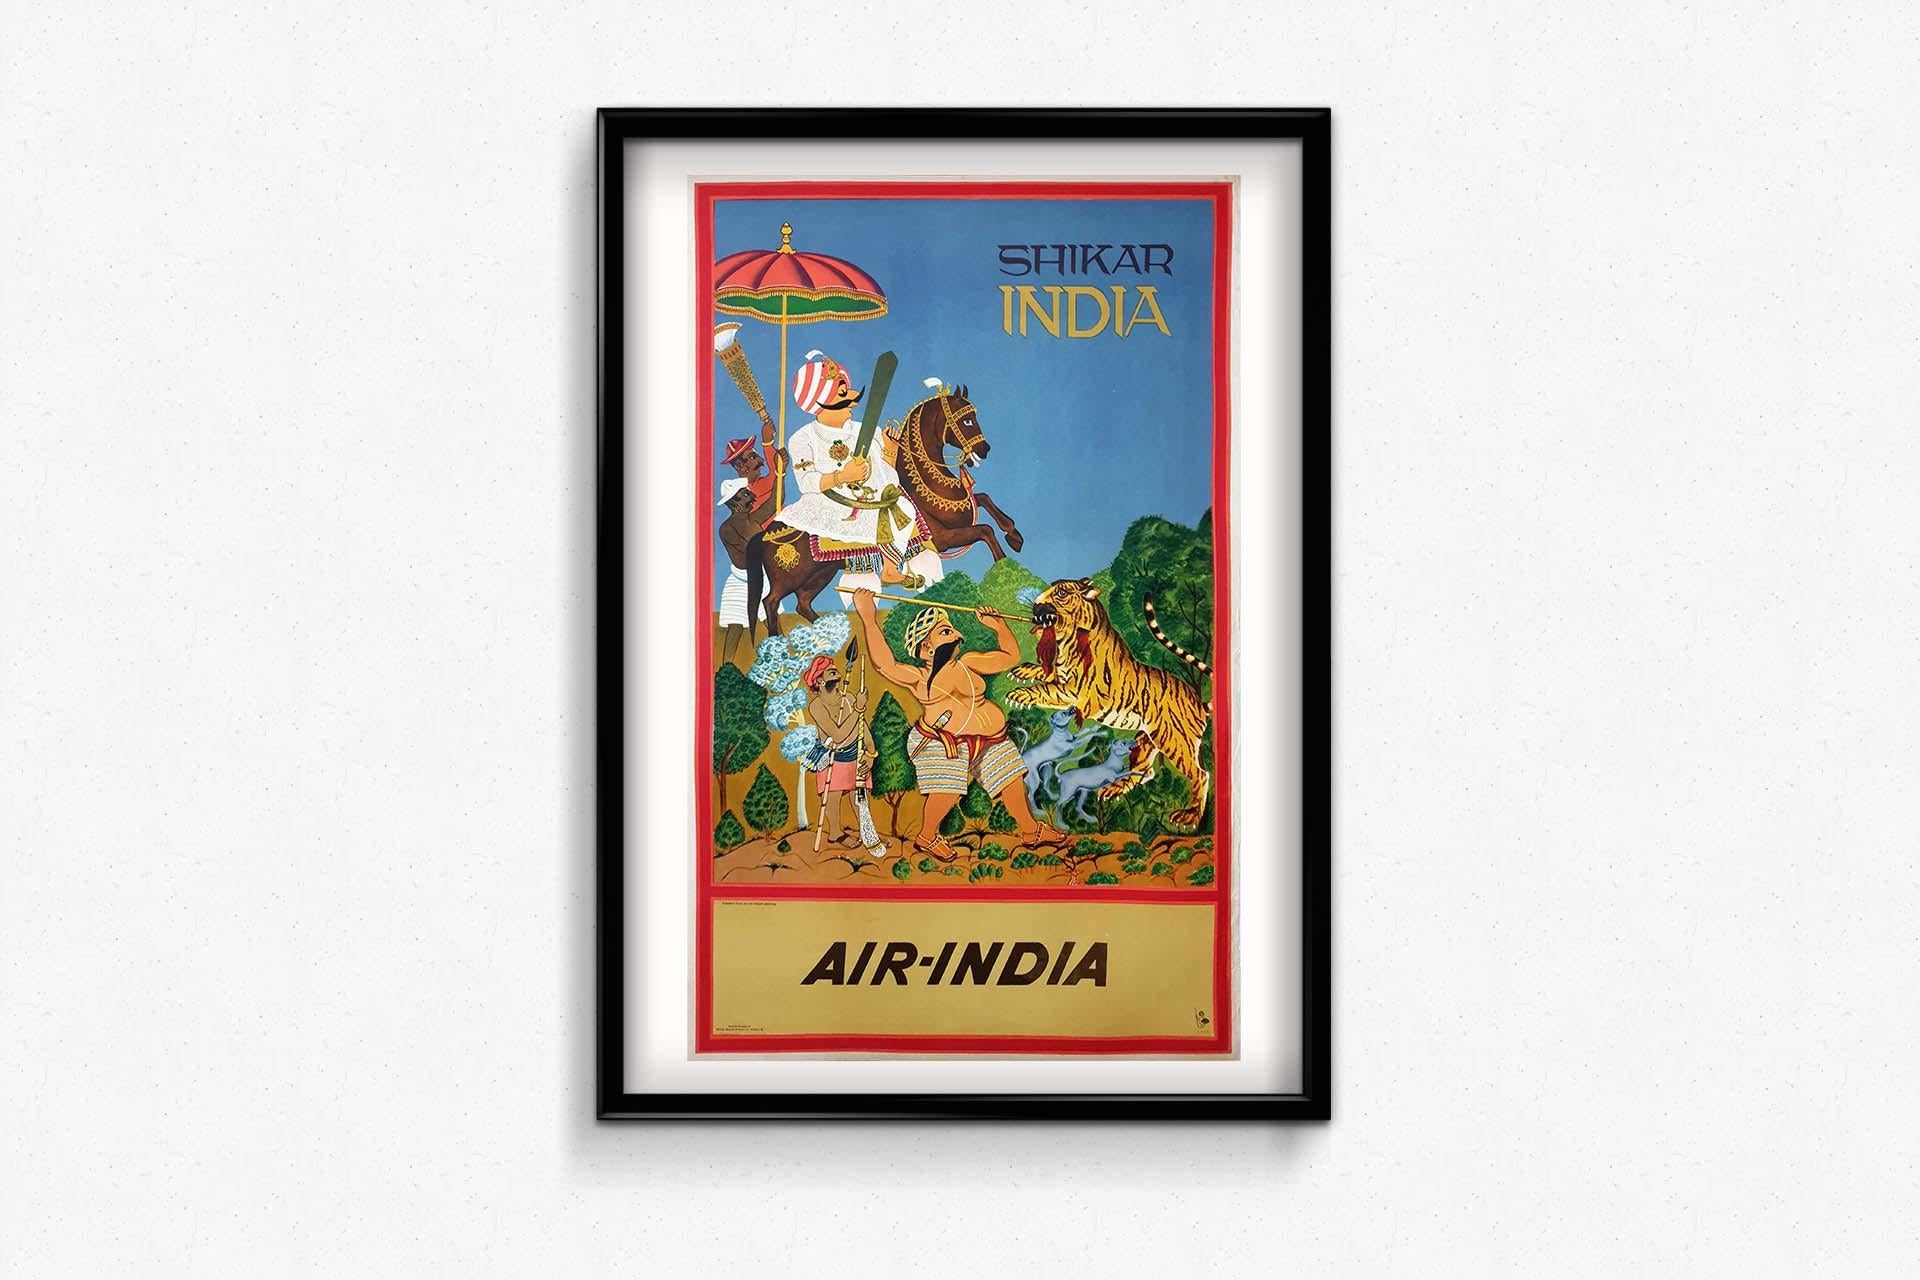 Nice poster of Air India adapted from an old Indian painting
This rare poster from 1968 was commissioned by Air India, which is the national airline of India, created in 1932.
At the time, it was common to use mascots in its marketing strategy.